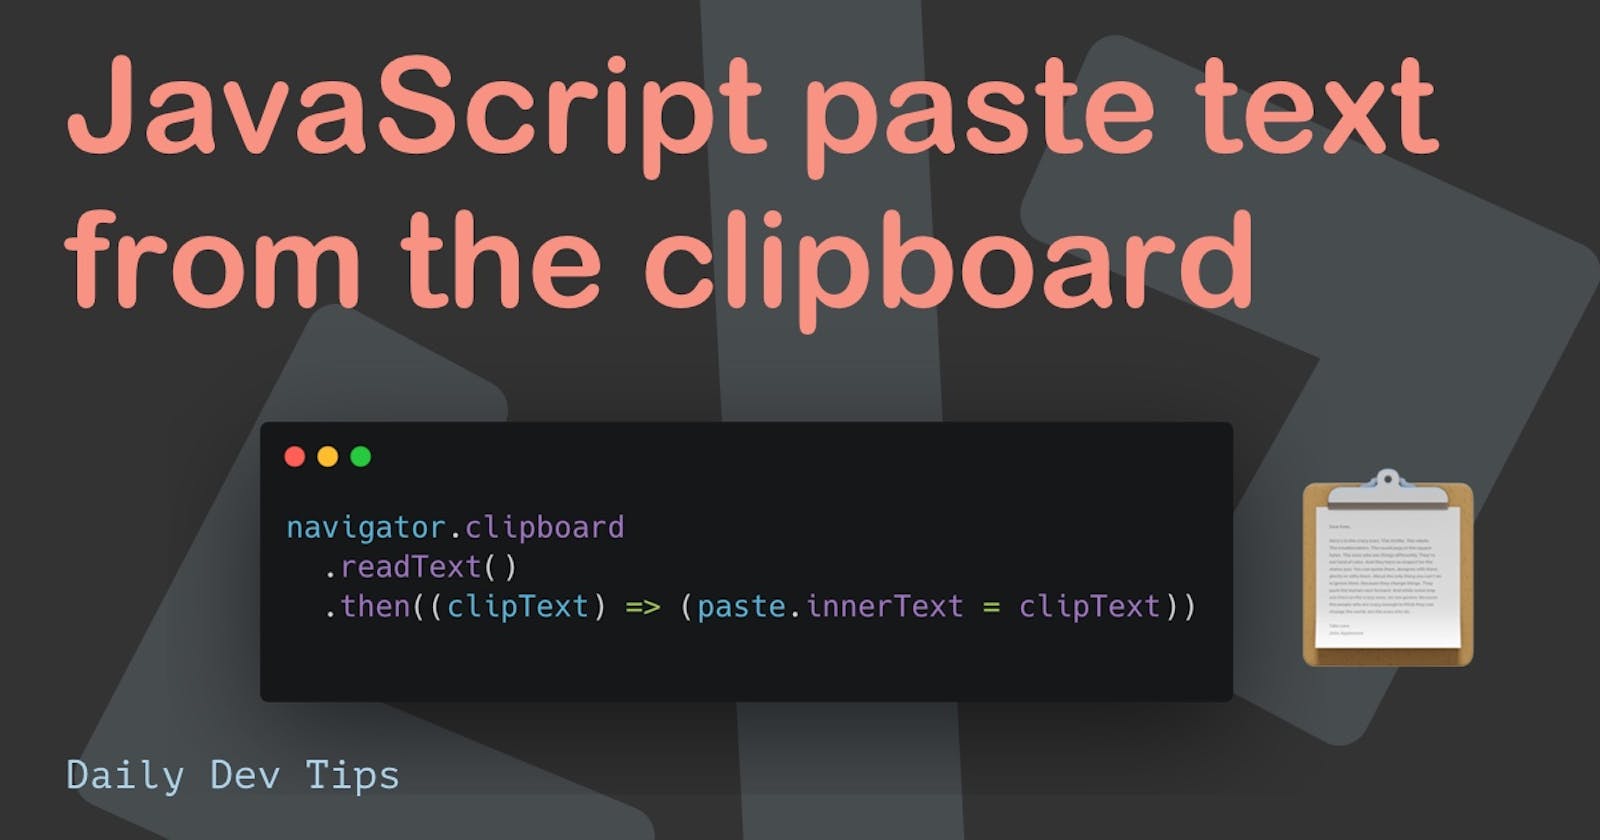 JavaScript paste text from the clipboard